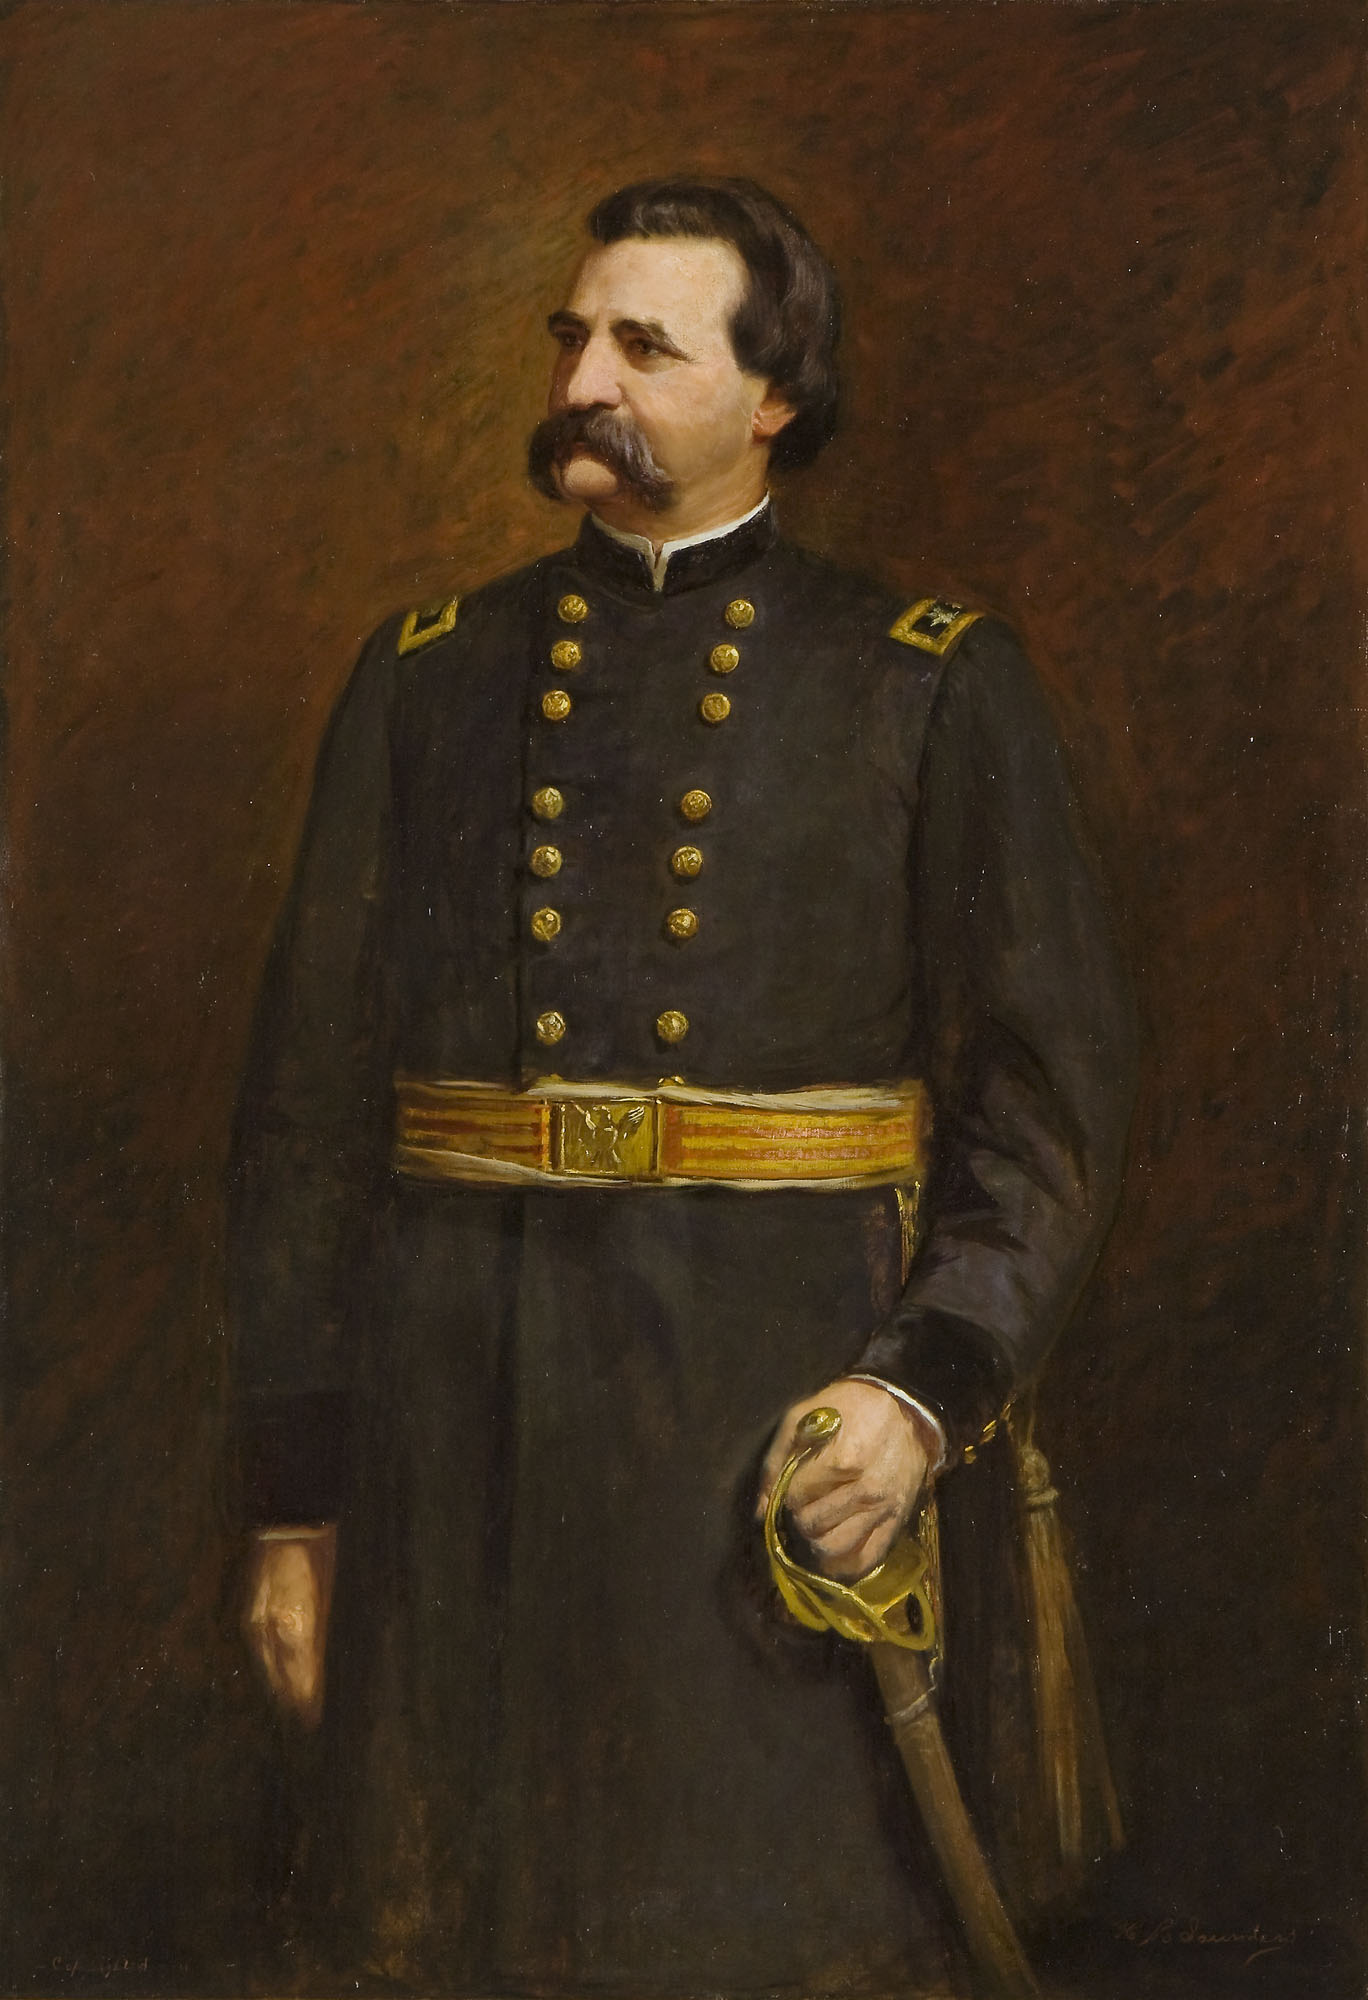 H. K. Saunders, General John A. Logan, 1911, oil on canvas, 65 x 45 inches (Chicago Public Library)